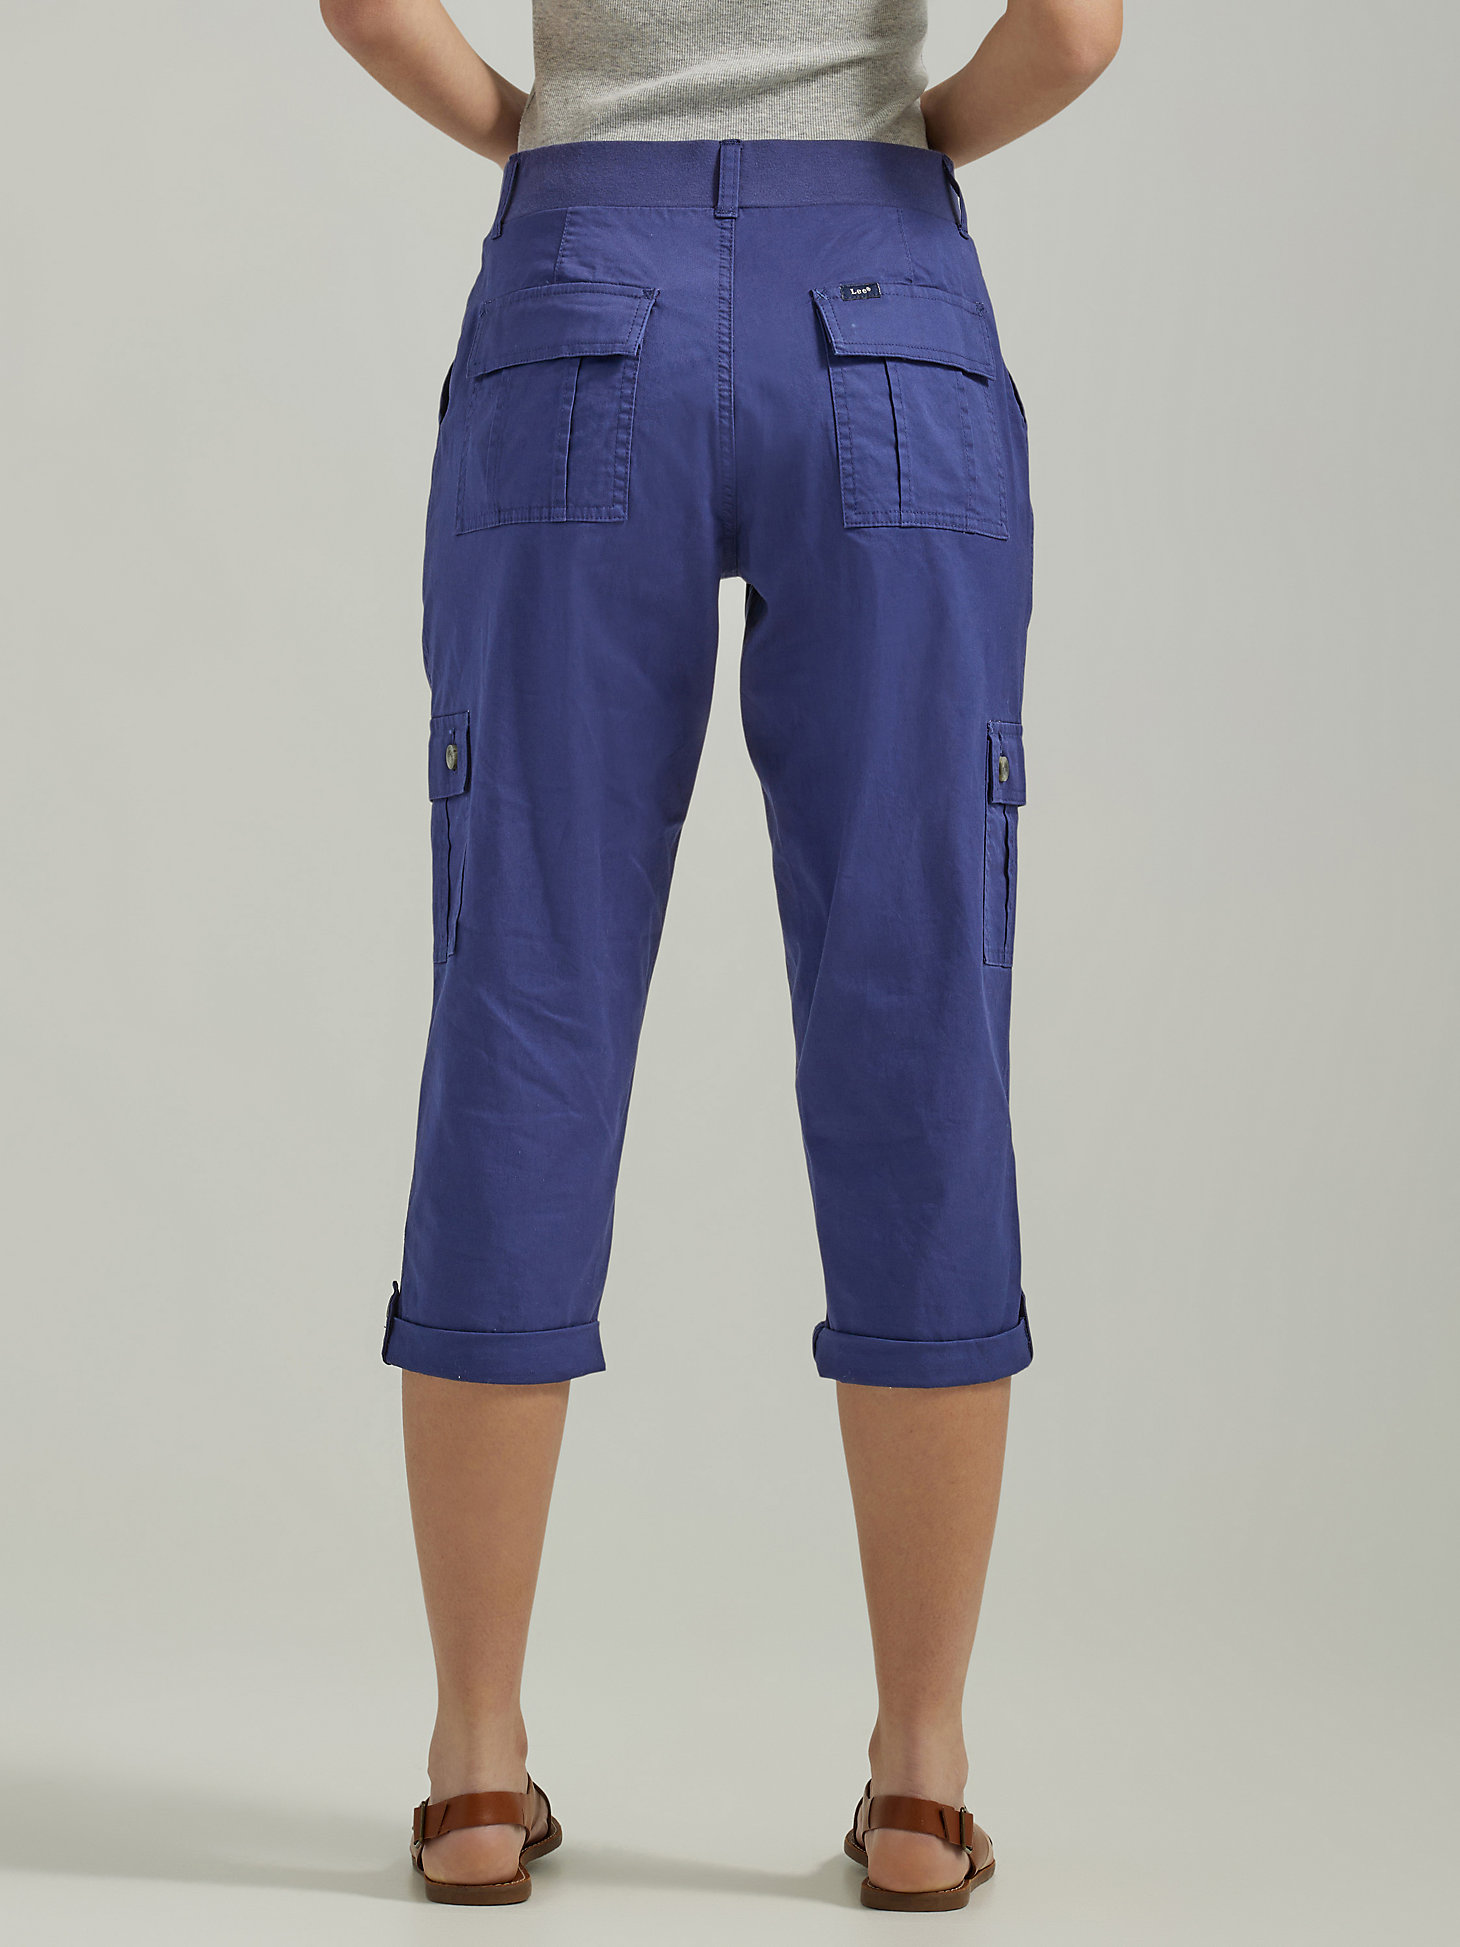 Women's Ultra Lux with Flex-to-Go Relaxed Cargo Capri in Medieval Blue alternative view 1